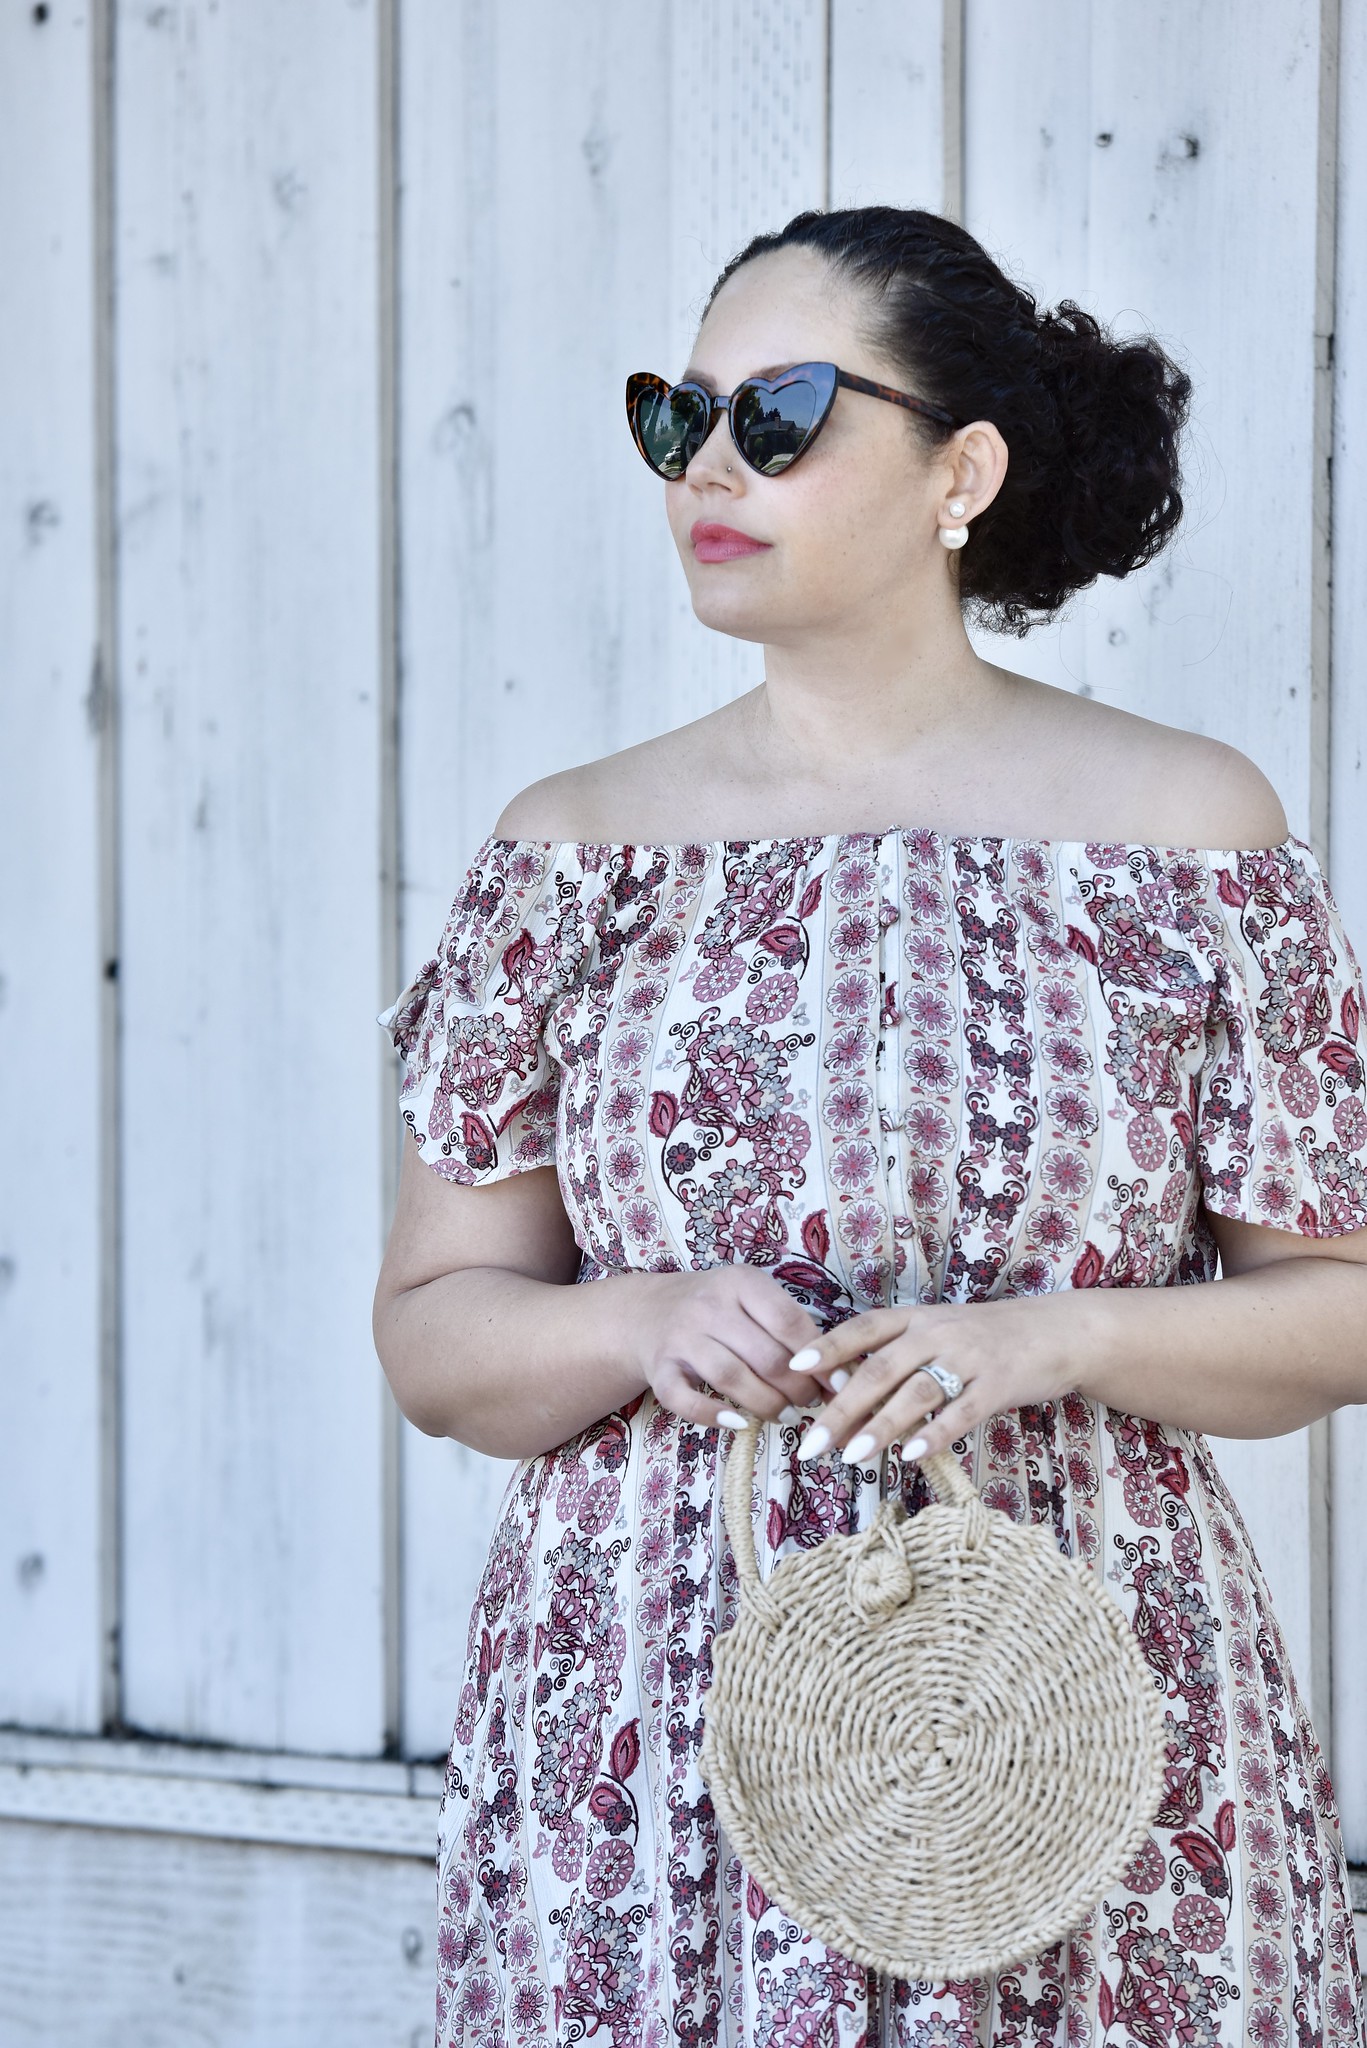 This $22 Dress is a Must-Have via @GirlWithCurves #dress #budget #walmart #plussize #style #fashion #floral